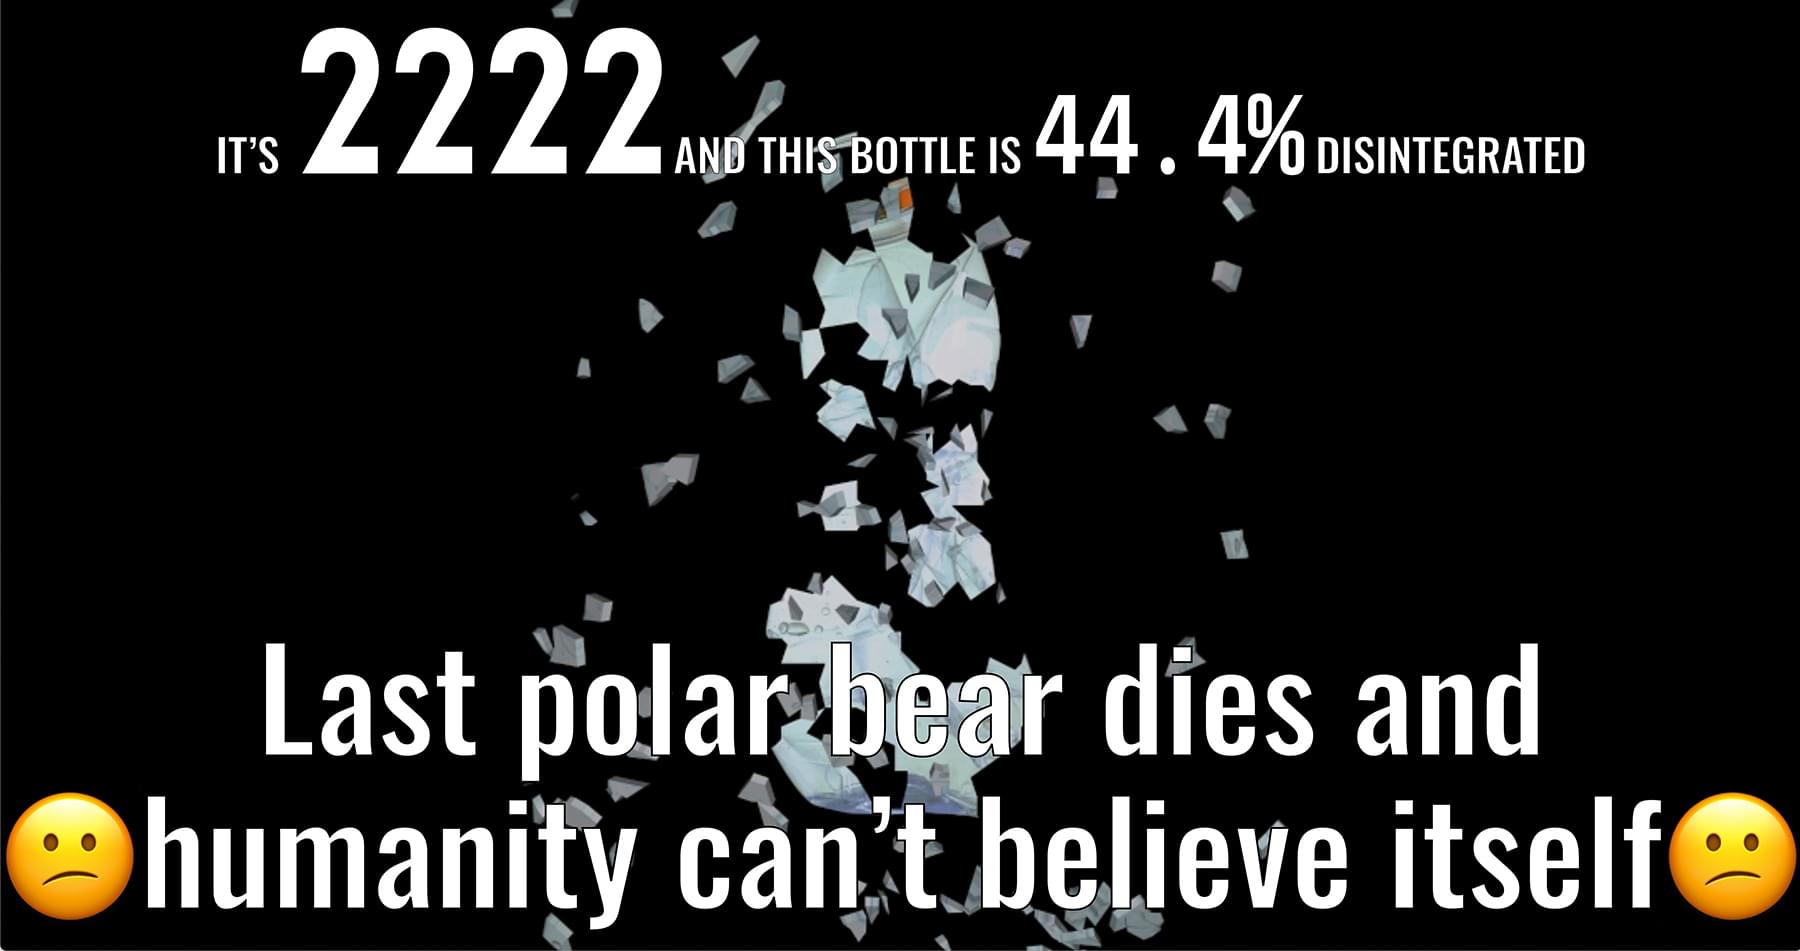 Screenshot that says "It is 2222 and this bottle is 44.4% disintegrated" on top; in the middle of the image is a photograph of a plastic bottle, and on the bottom is the text "Last polar bear dies and humanity cant believe itself" sandwitched between two gun confused-face emojis; black background